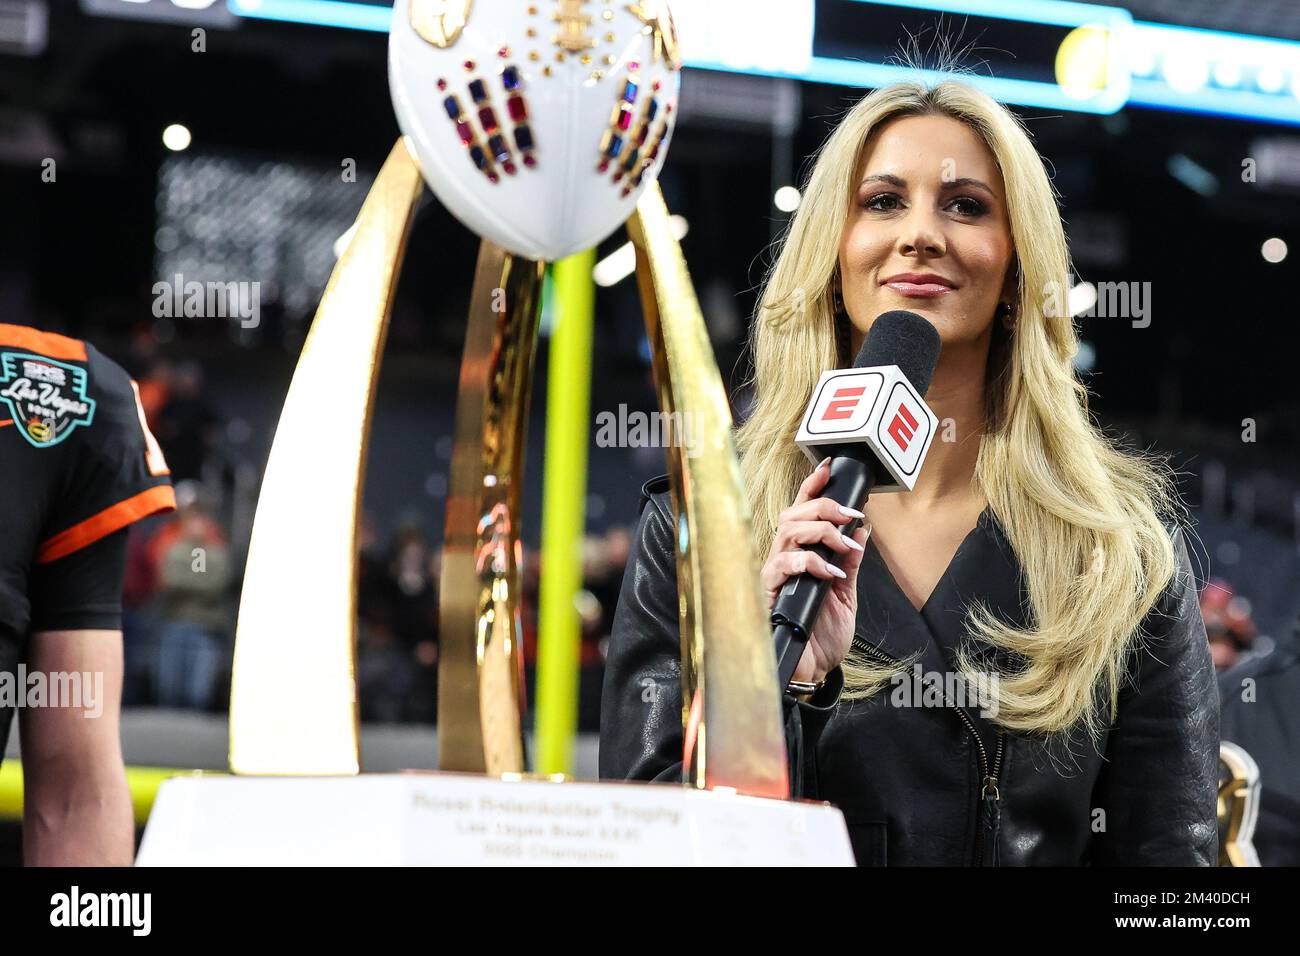 Las Vegas, NV, USA. 17th Dec, 2022. Laura Rutledge, ESPN sideline reporter, on stage at the conclusion of the SRS Distribution Las Vegas Bowl featuring the Florida Gators and the Oregon State Beavers at Allegiant Stadium in Las Vegas, NV. Christopher Trim/CSM/Alamy Live News Stock Photo